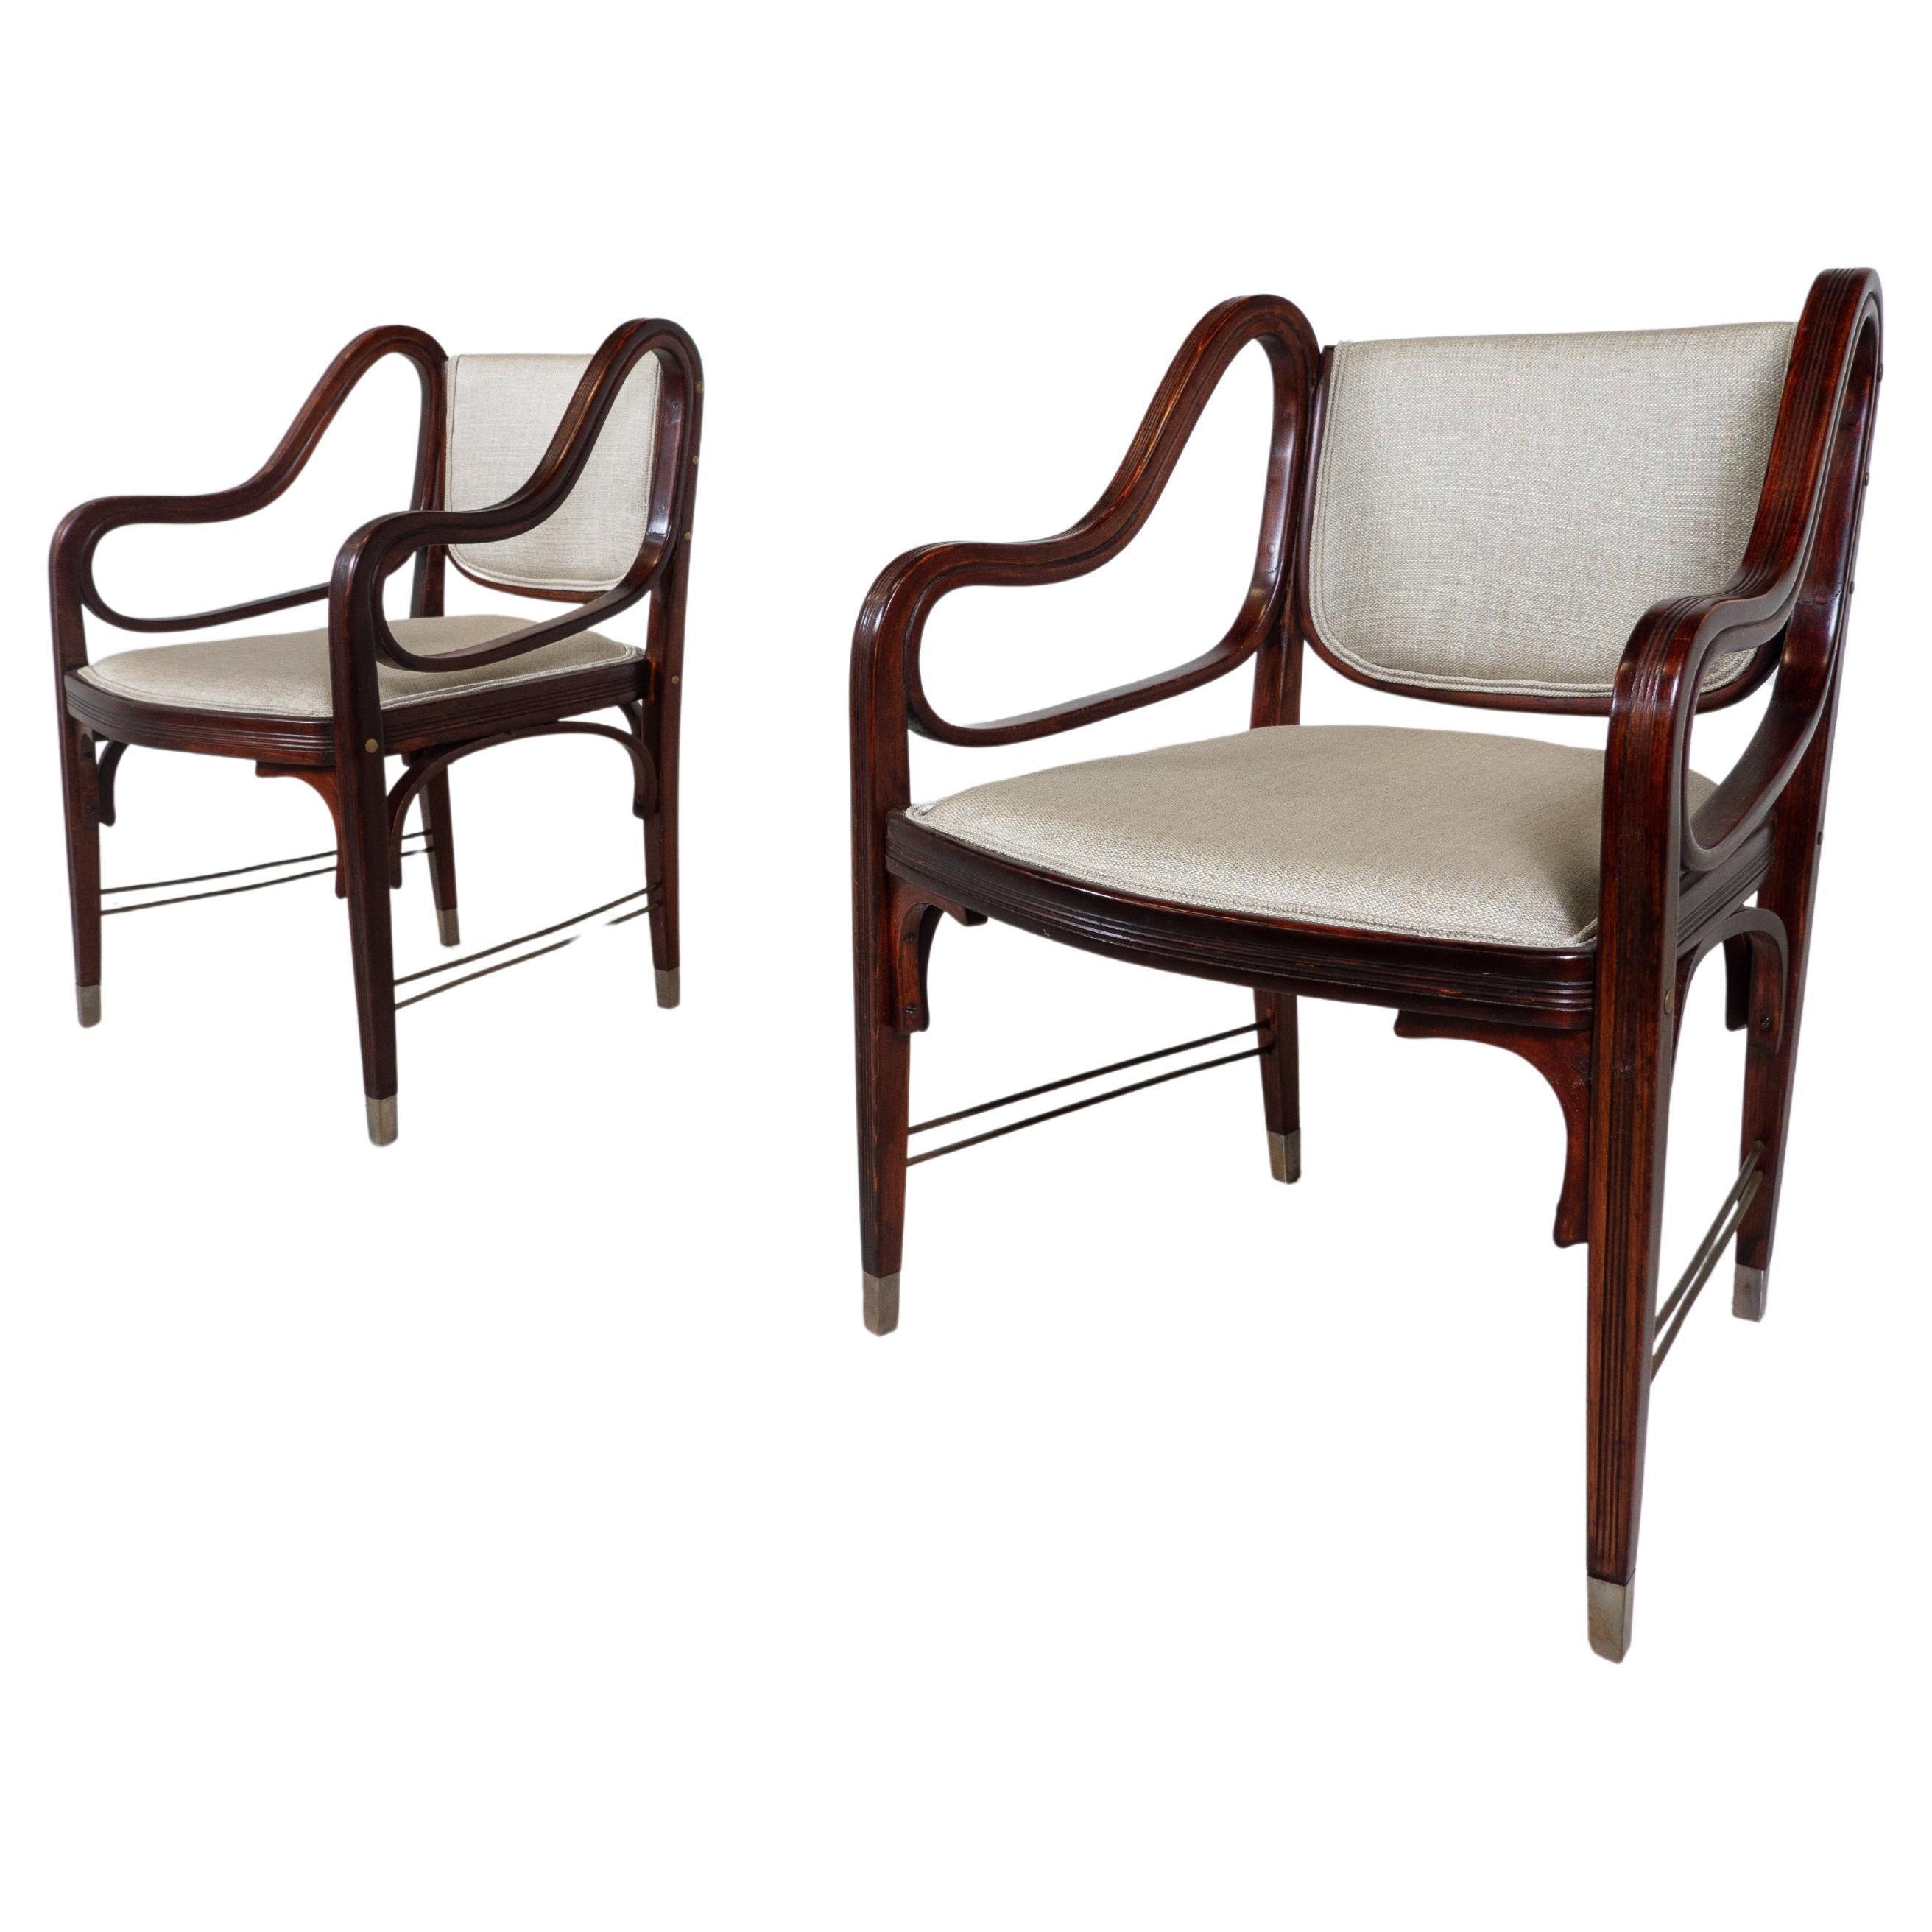 Pair of Armchairs "412" by Otto Wagner for J&J Kohn, Austria, 1900s